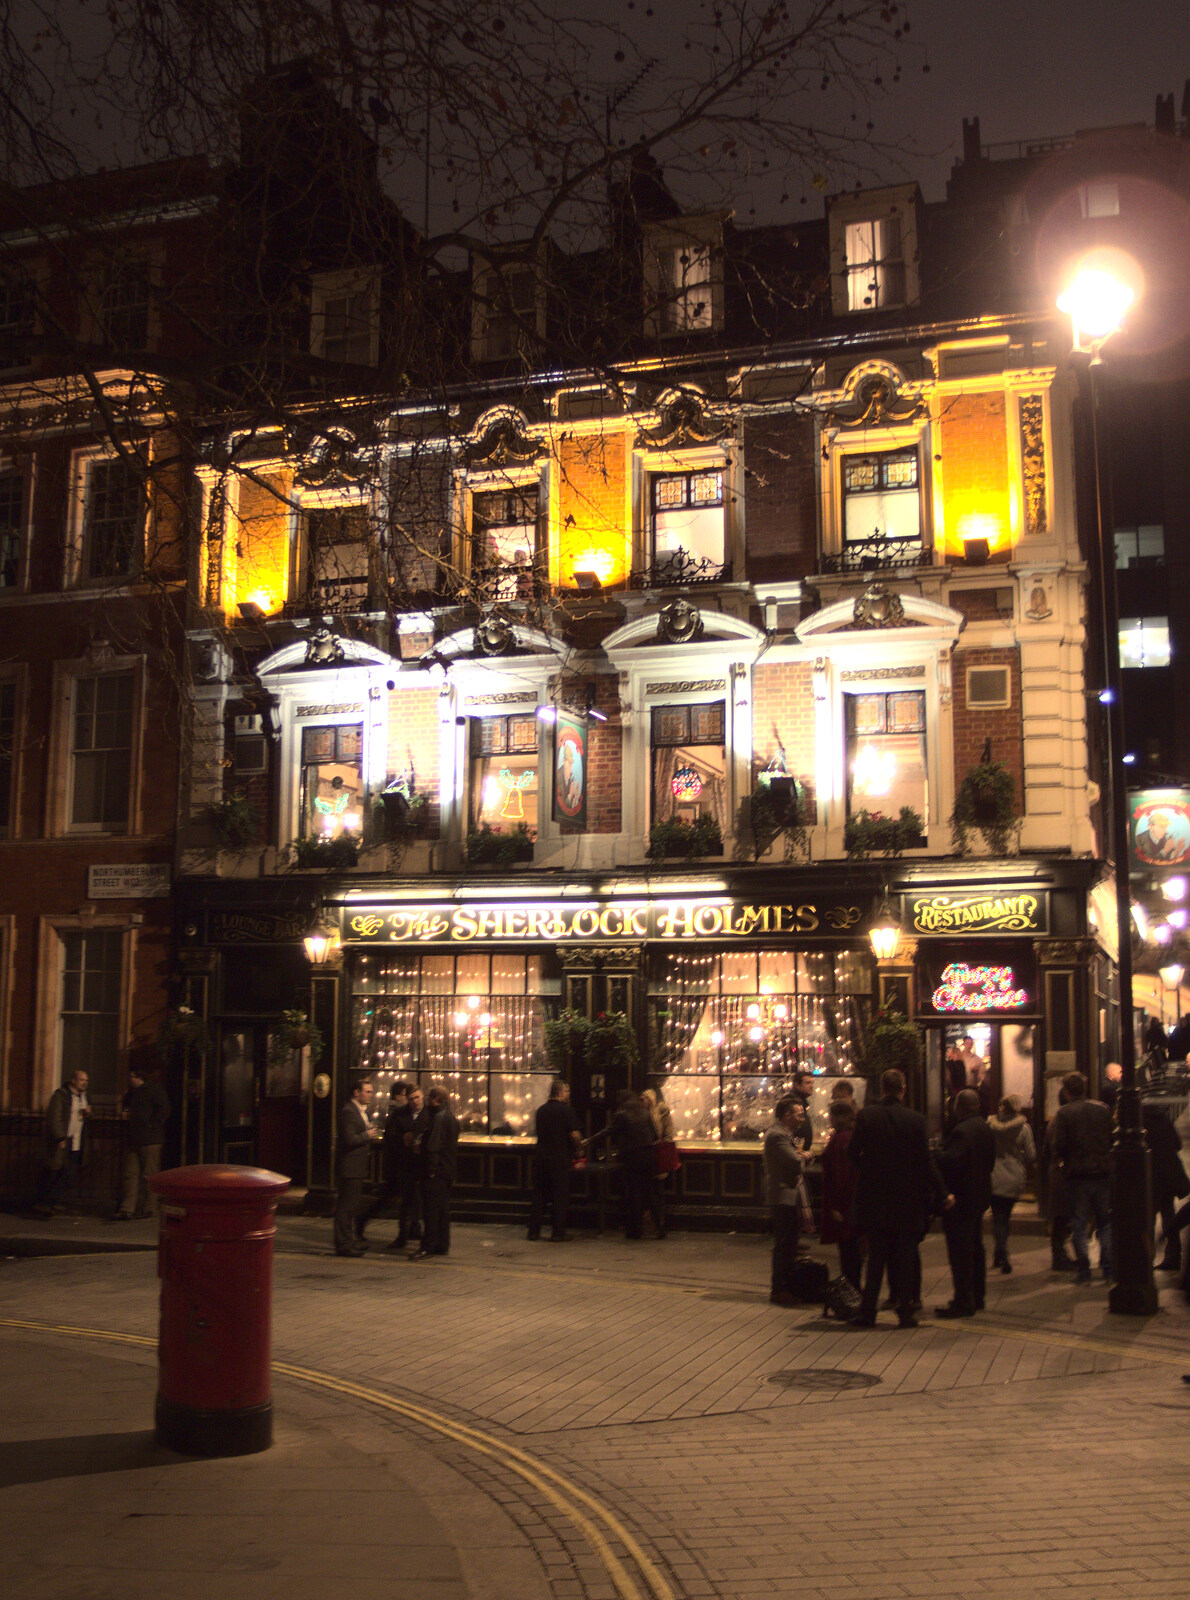 The Sherlock Holmes, off Northumberland Avenue from SwiftKey Innovation Nights, Westminster, London - 19th December 2014